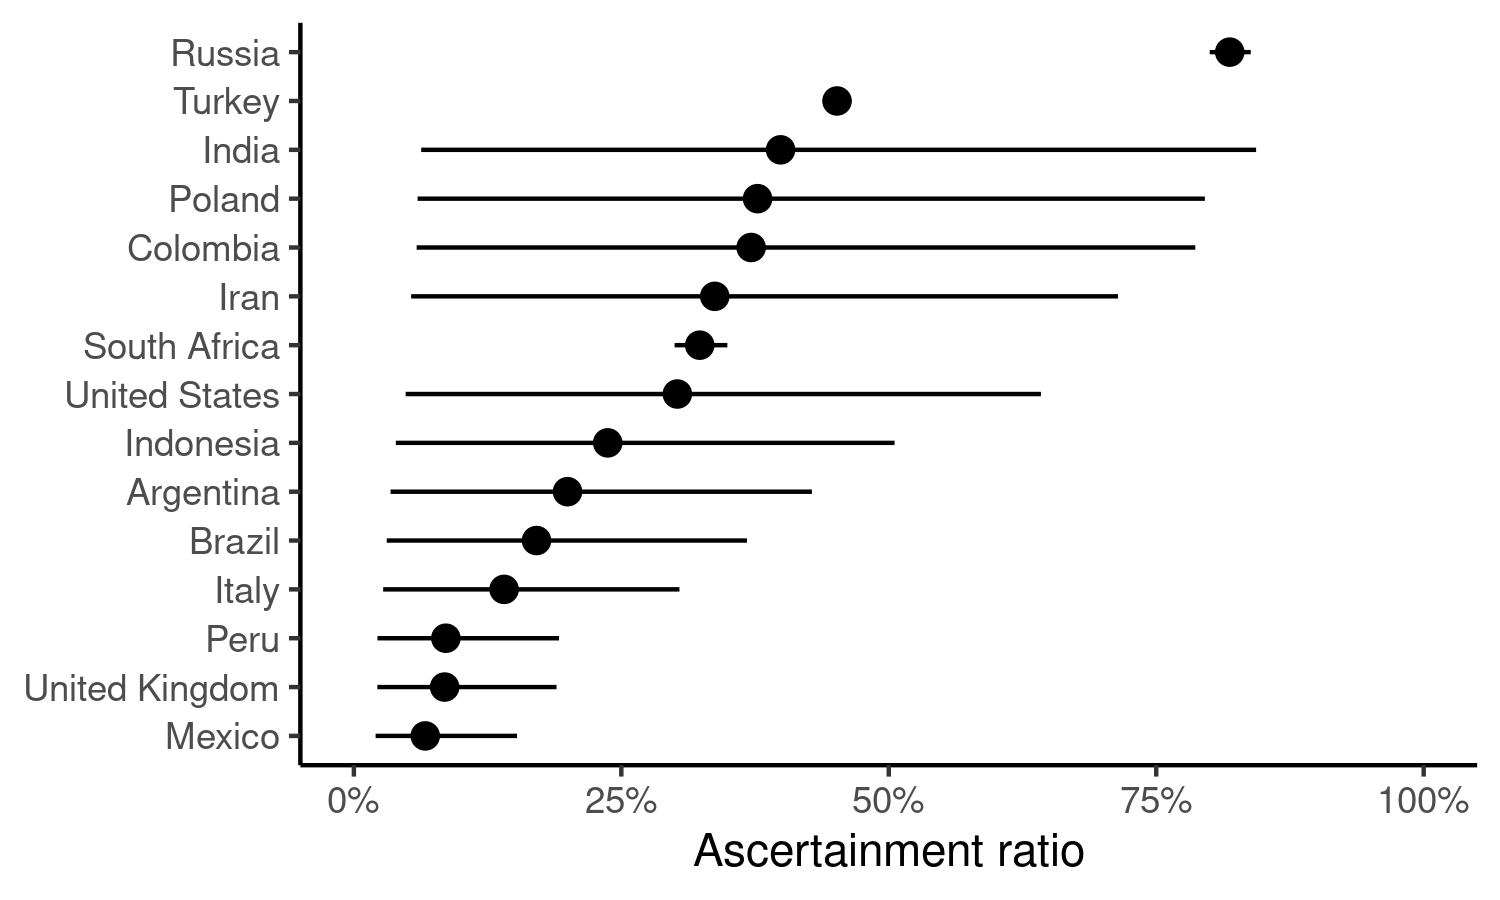 Example plot of the ascertainment ratio by country during the early stages of the Covid-19 pandemic.